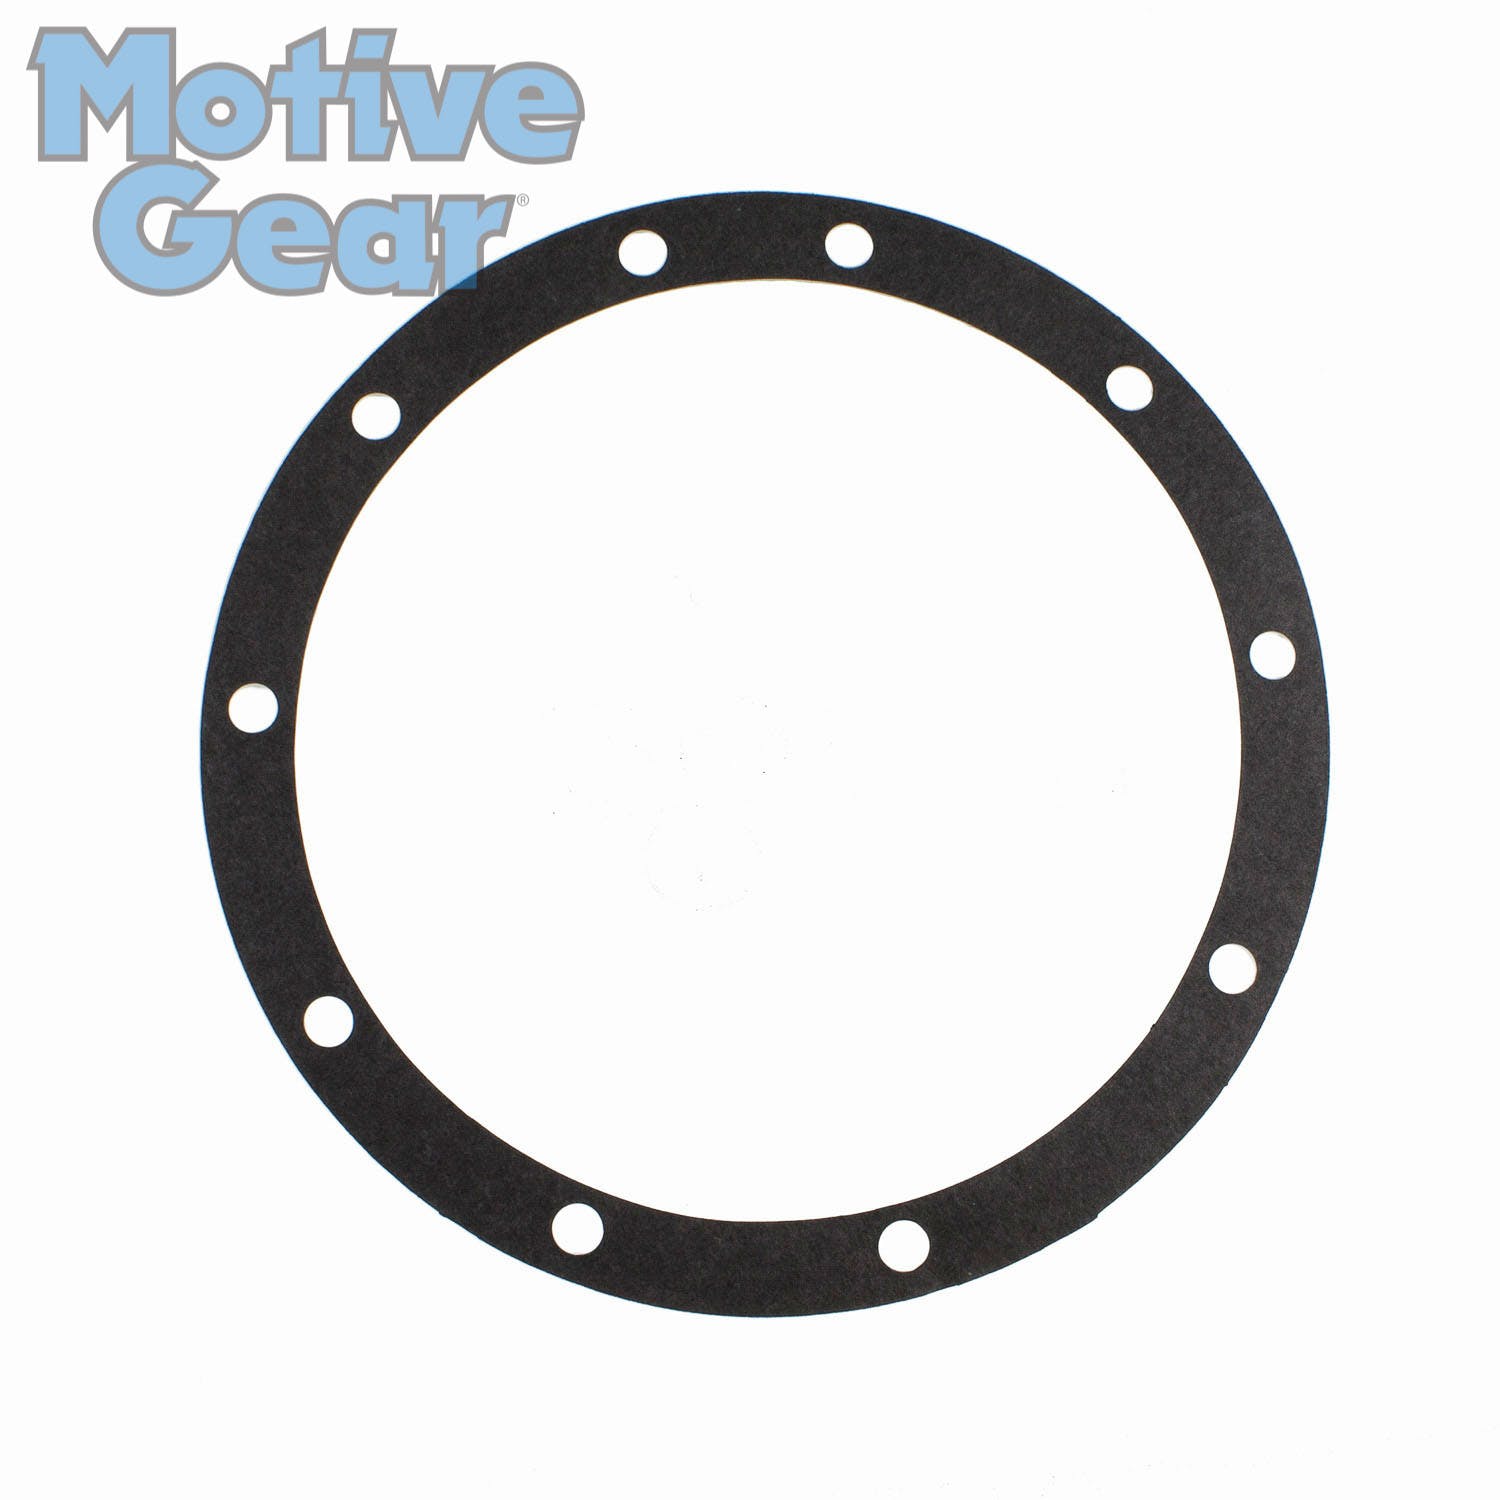 Motive Gear 5101 Differential Cover Gasket